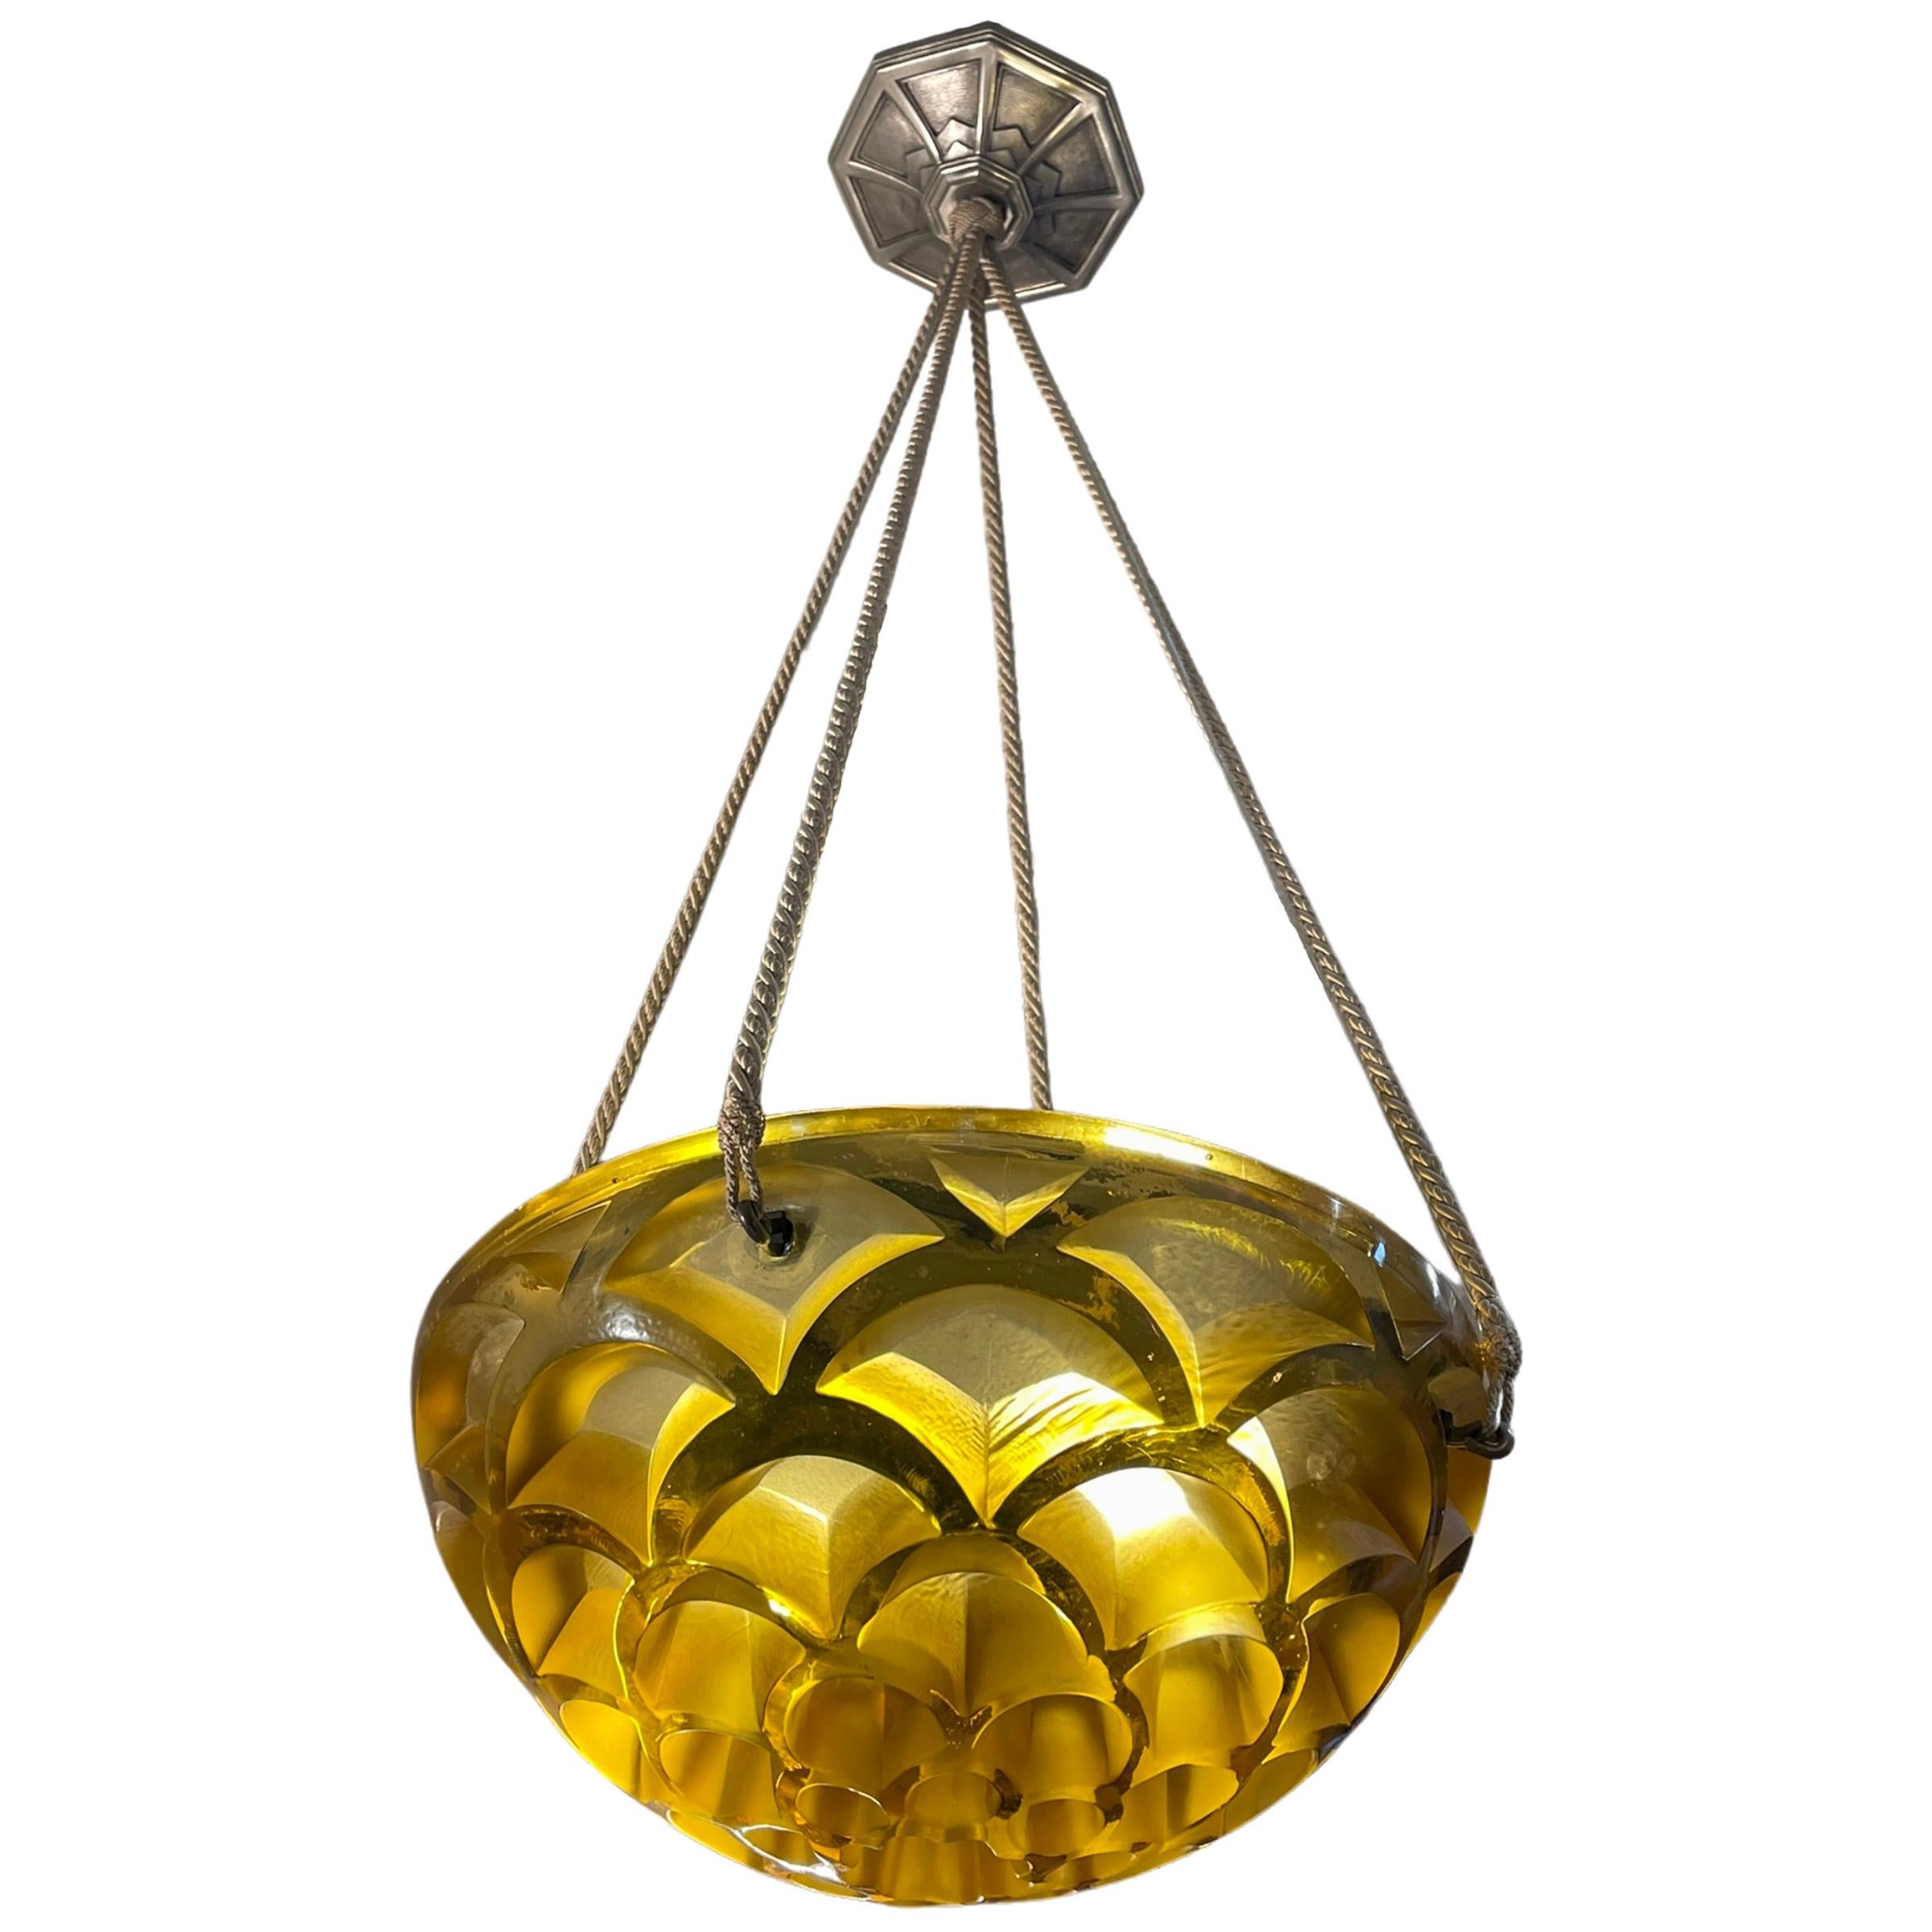 1926 Rene Lalique Rinceaux Complet Ceiling Light Chandelier Yellow Amber Glass